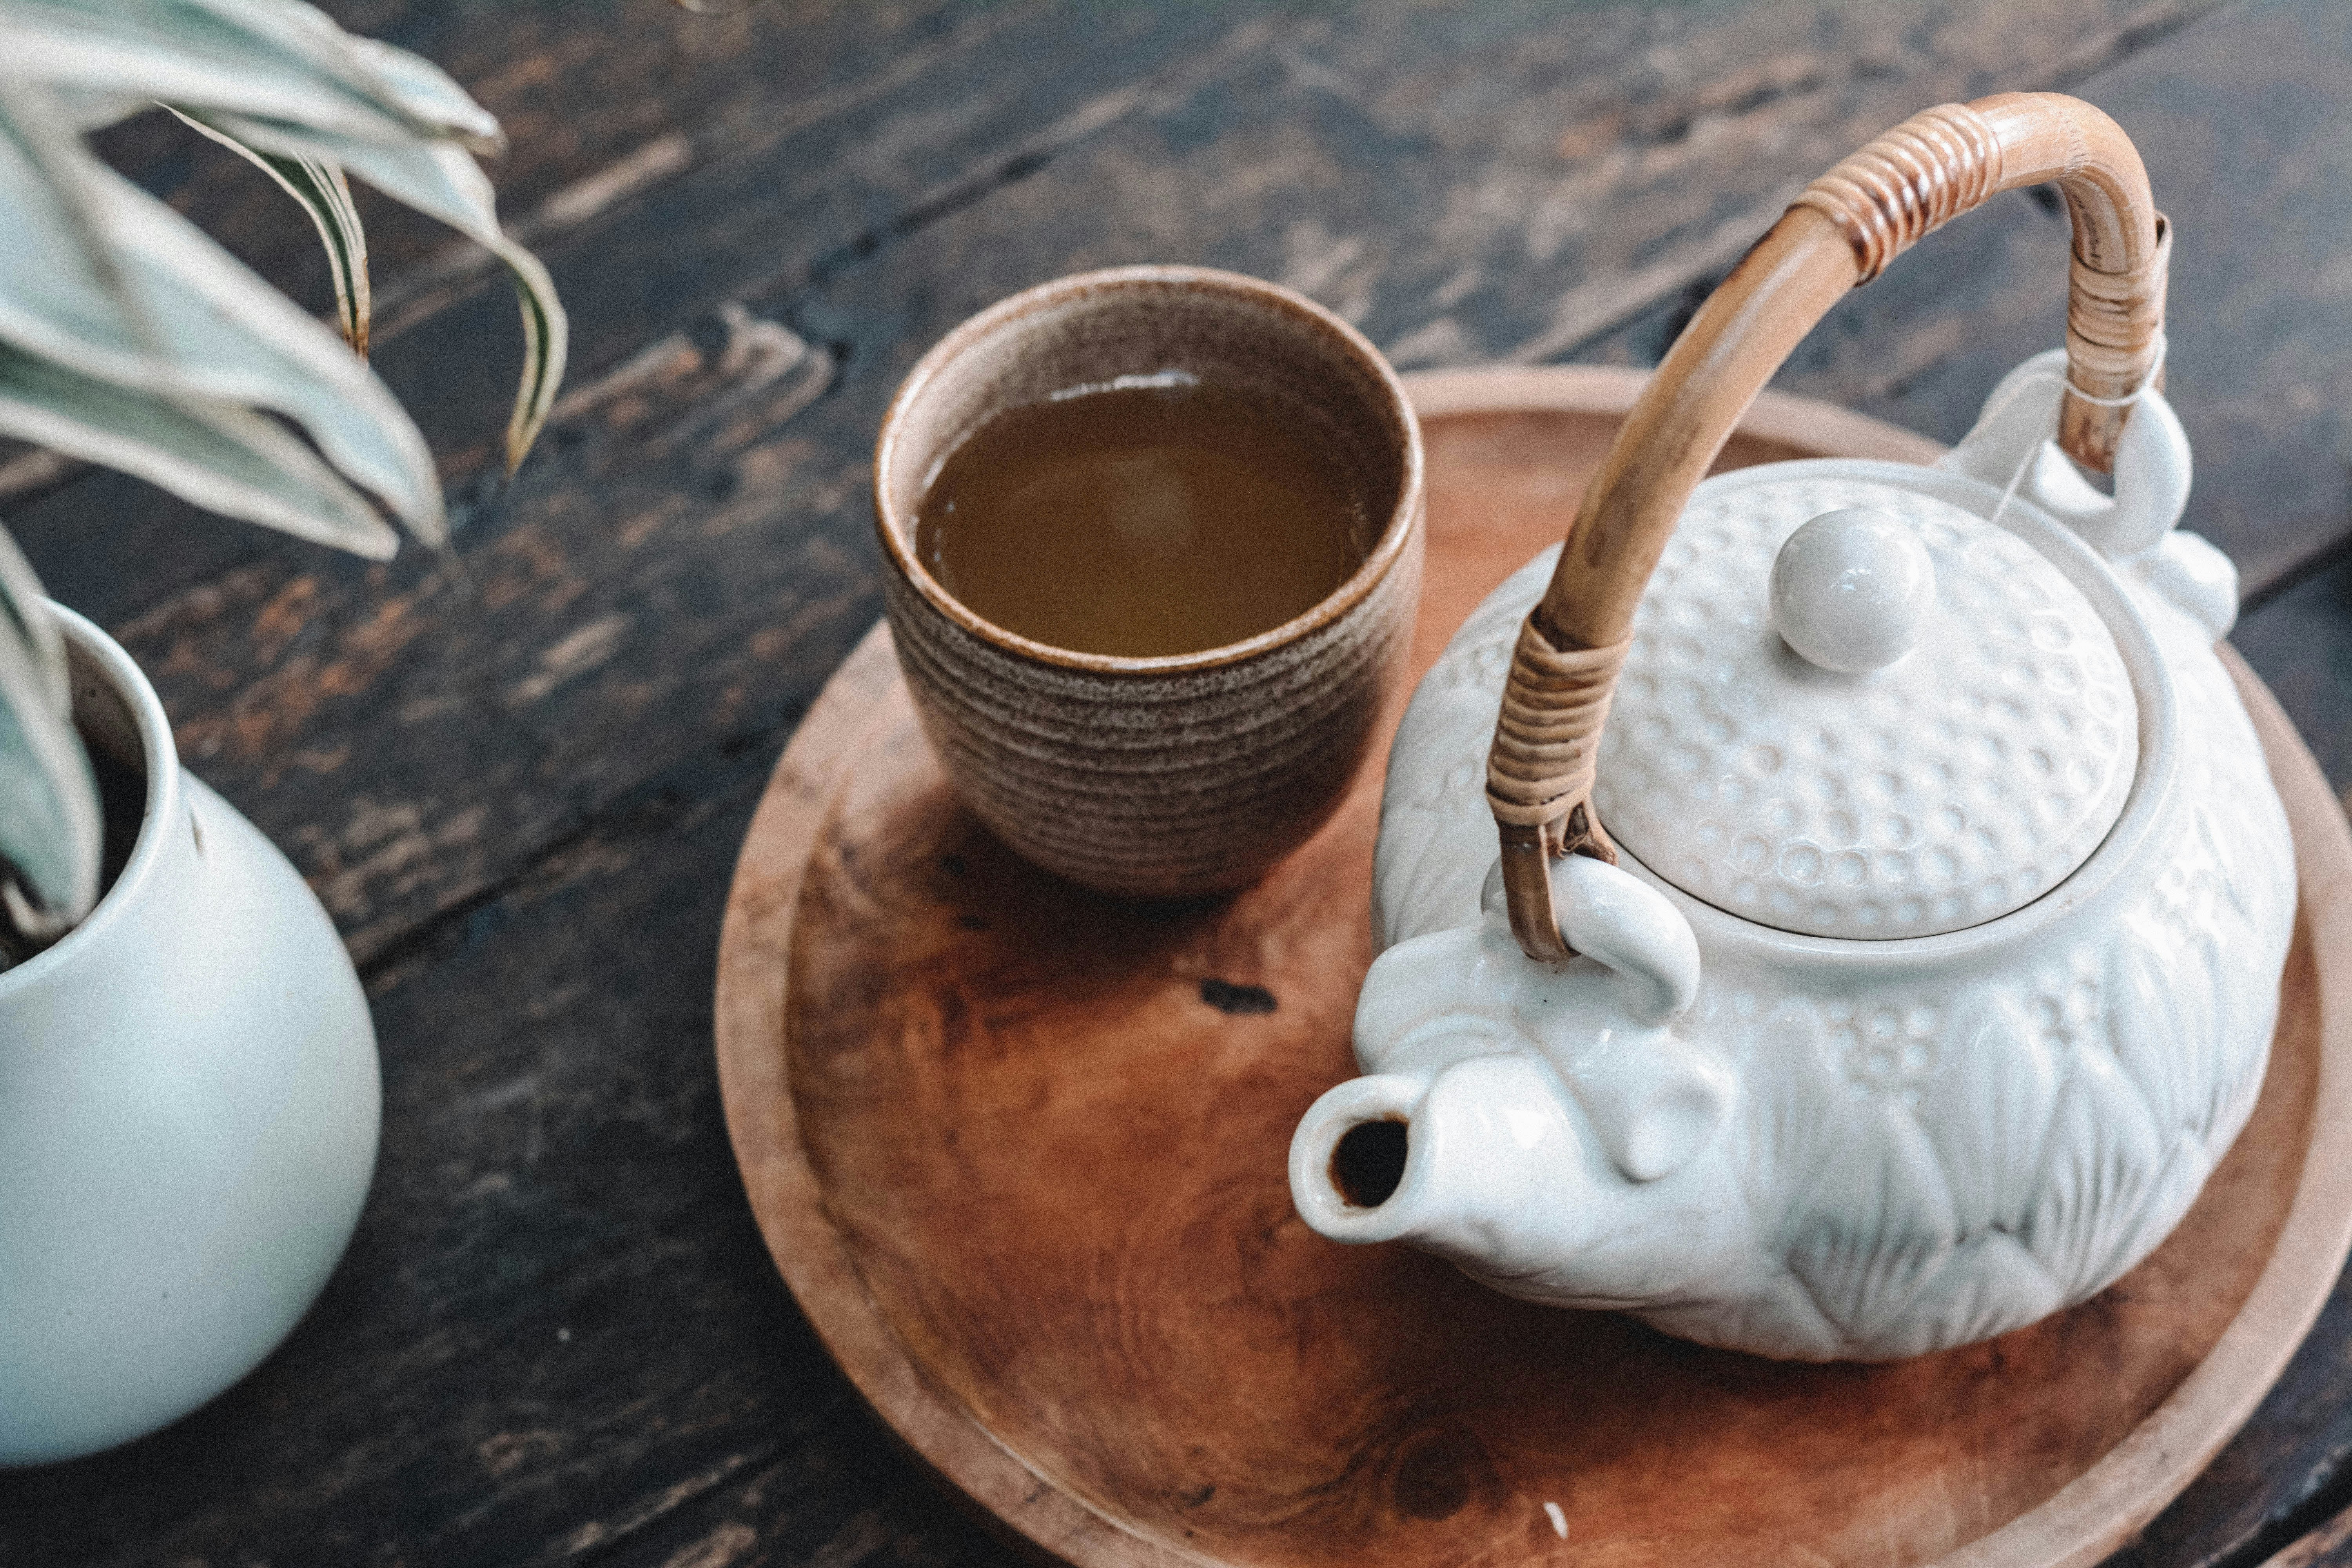 Is Tea Without Milk Good for Health? Exploring the Impact